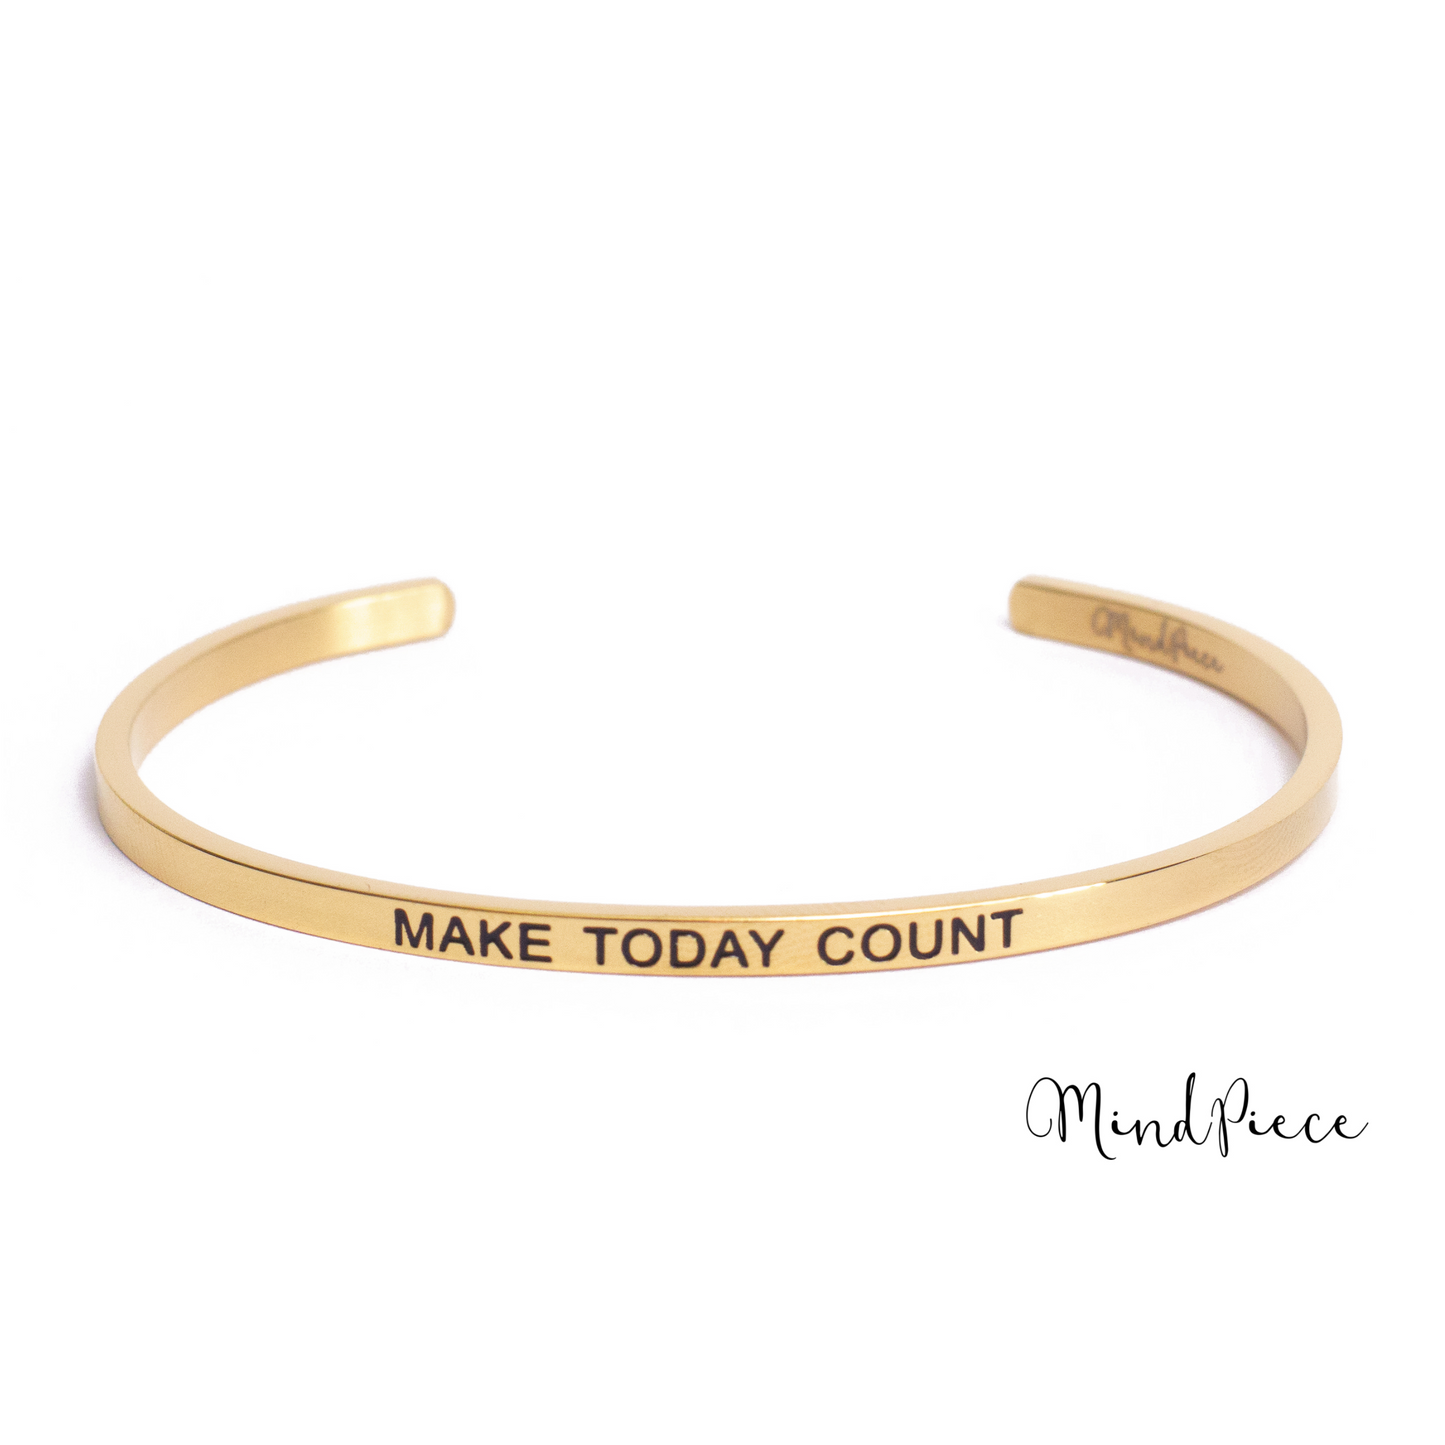 Bracelet quote | make today count (1 pcs) - silver & rose